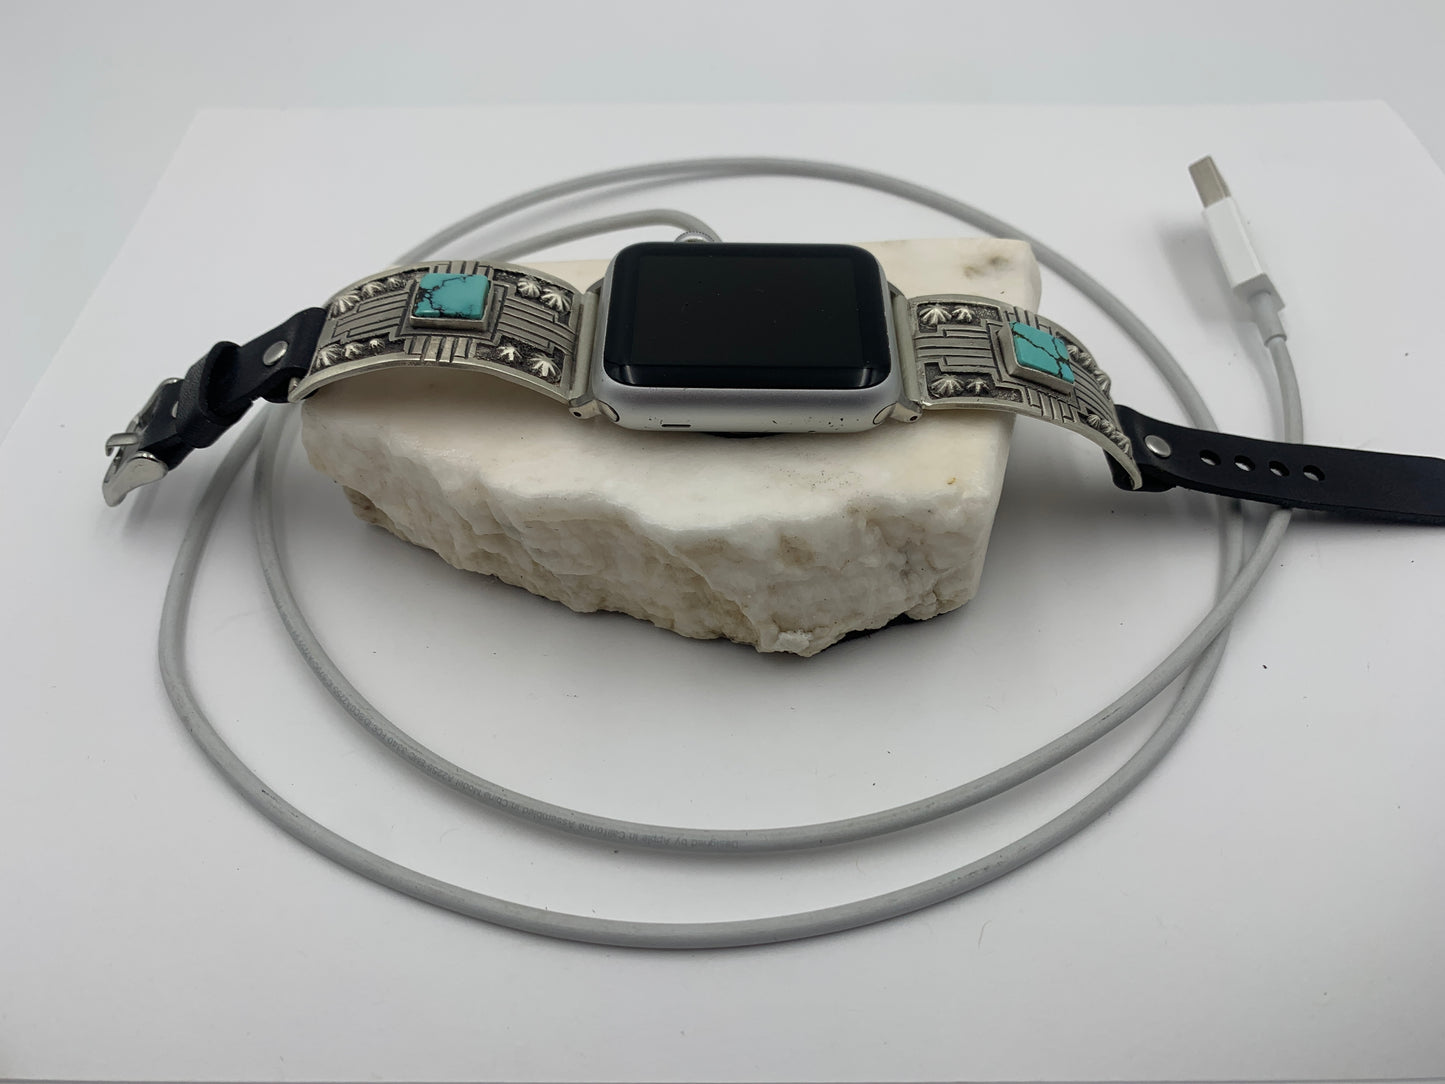 Native American Apple WATCH Charging Stone with Bull's Head (JT47)